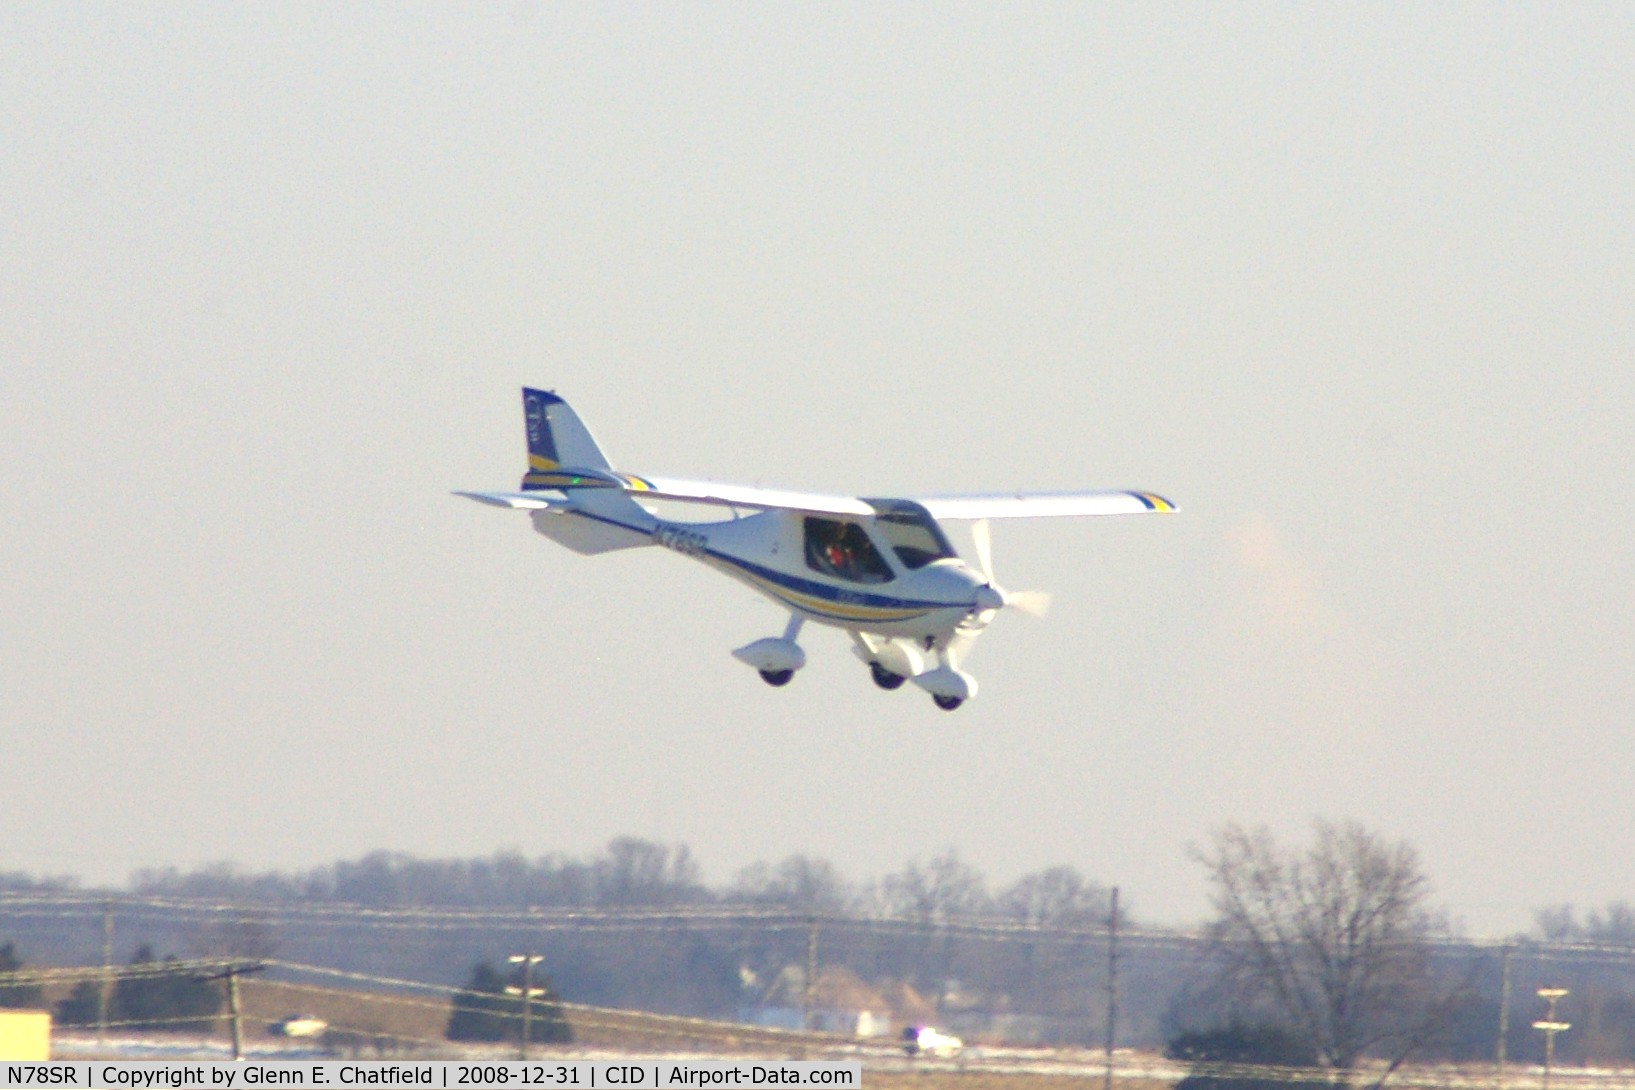 N78SR, 2006 Flight Design CTSW C/N 06-04-12, On final for touch and go, runway 27.  Shot with 450mm and 1.7 multiplier, and then cropped!